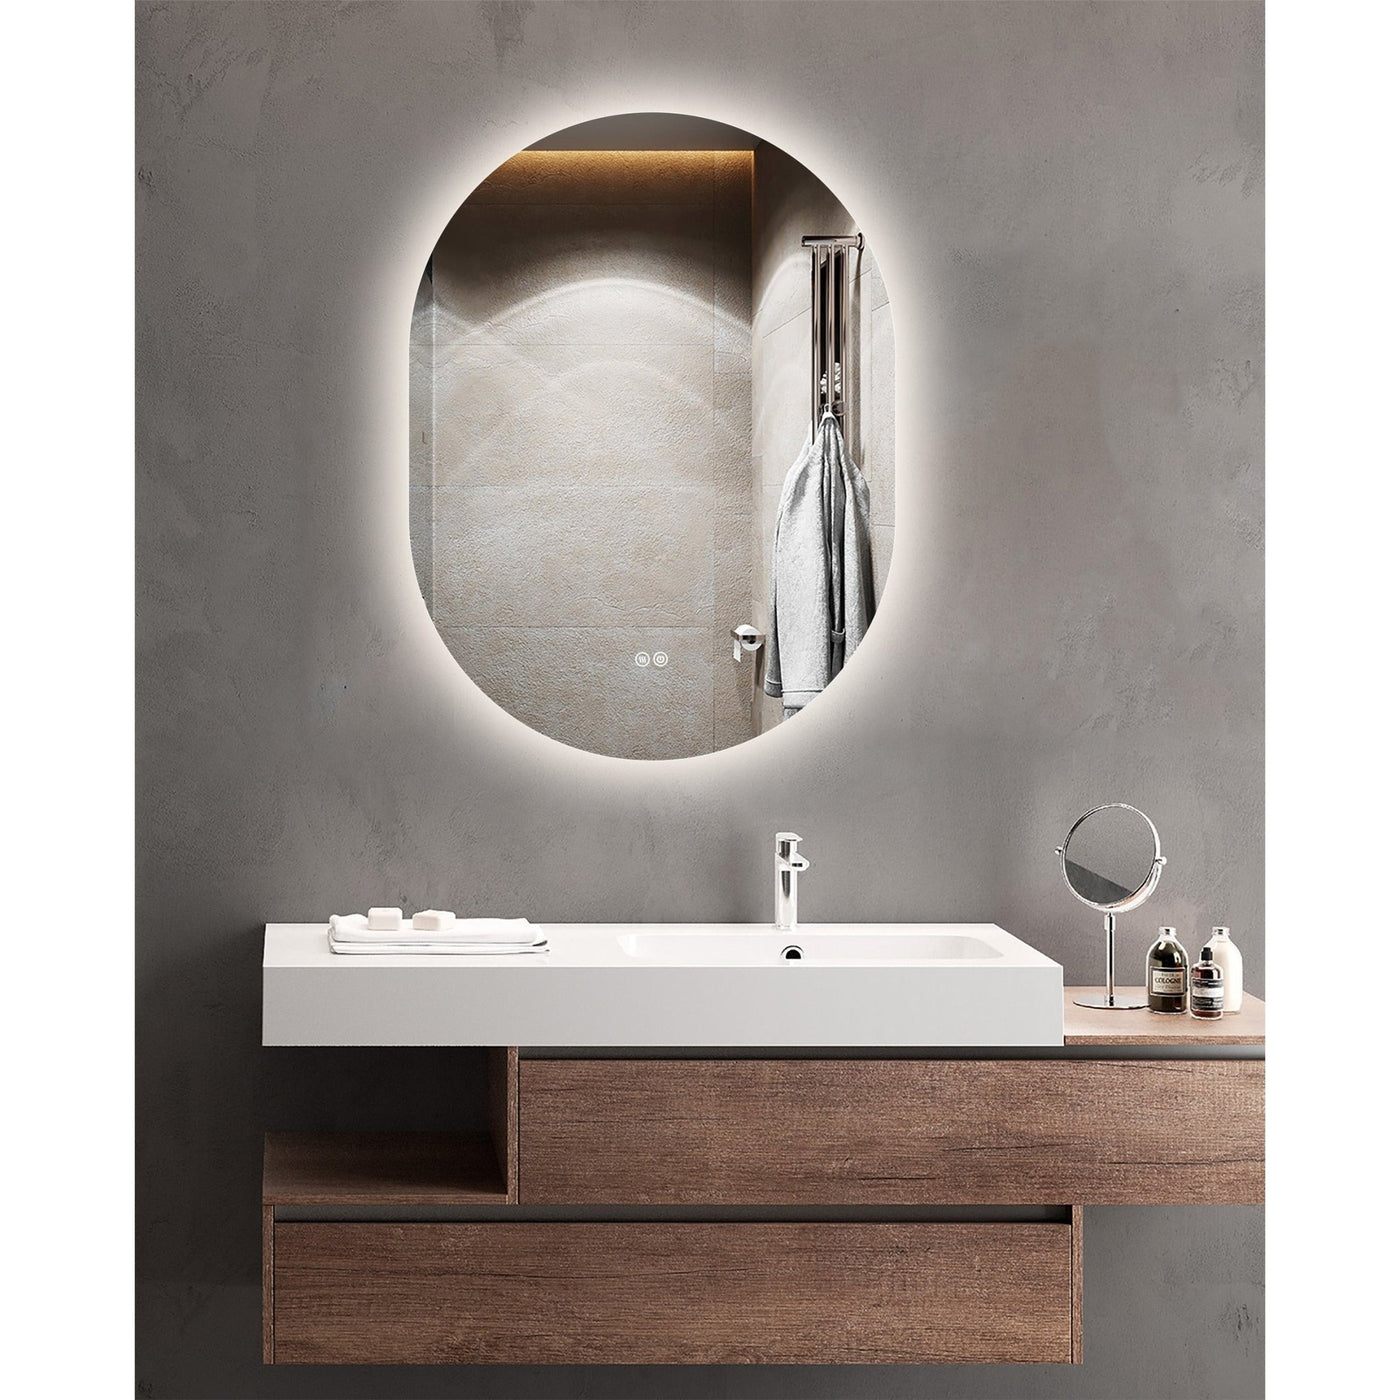 Backlit Oval LED Mirror with a Demister